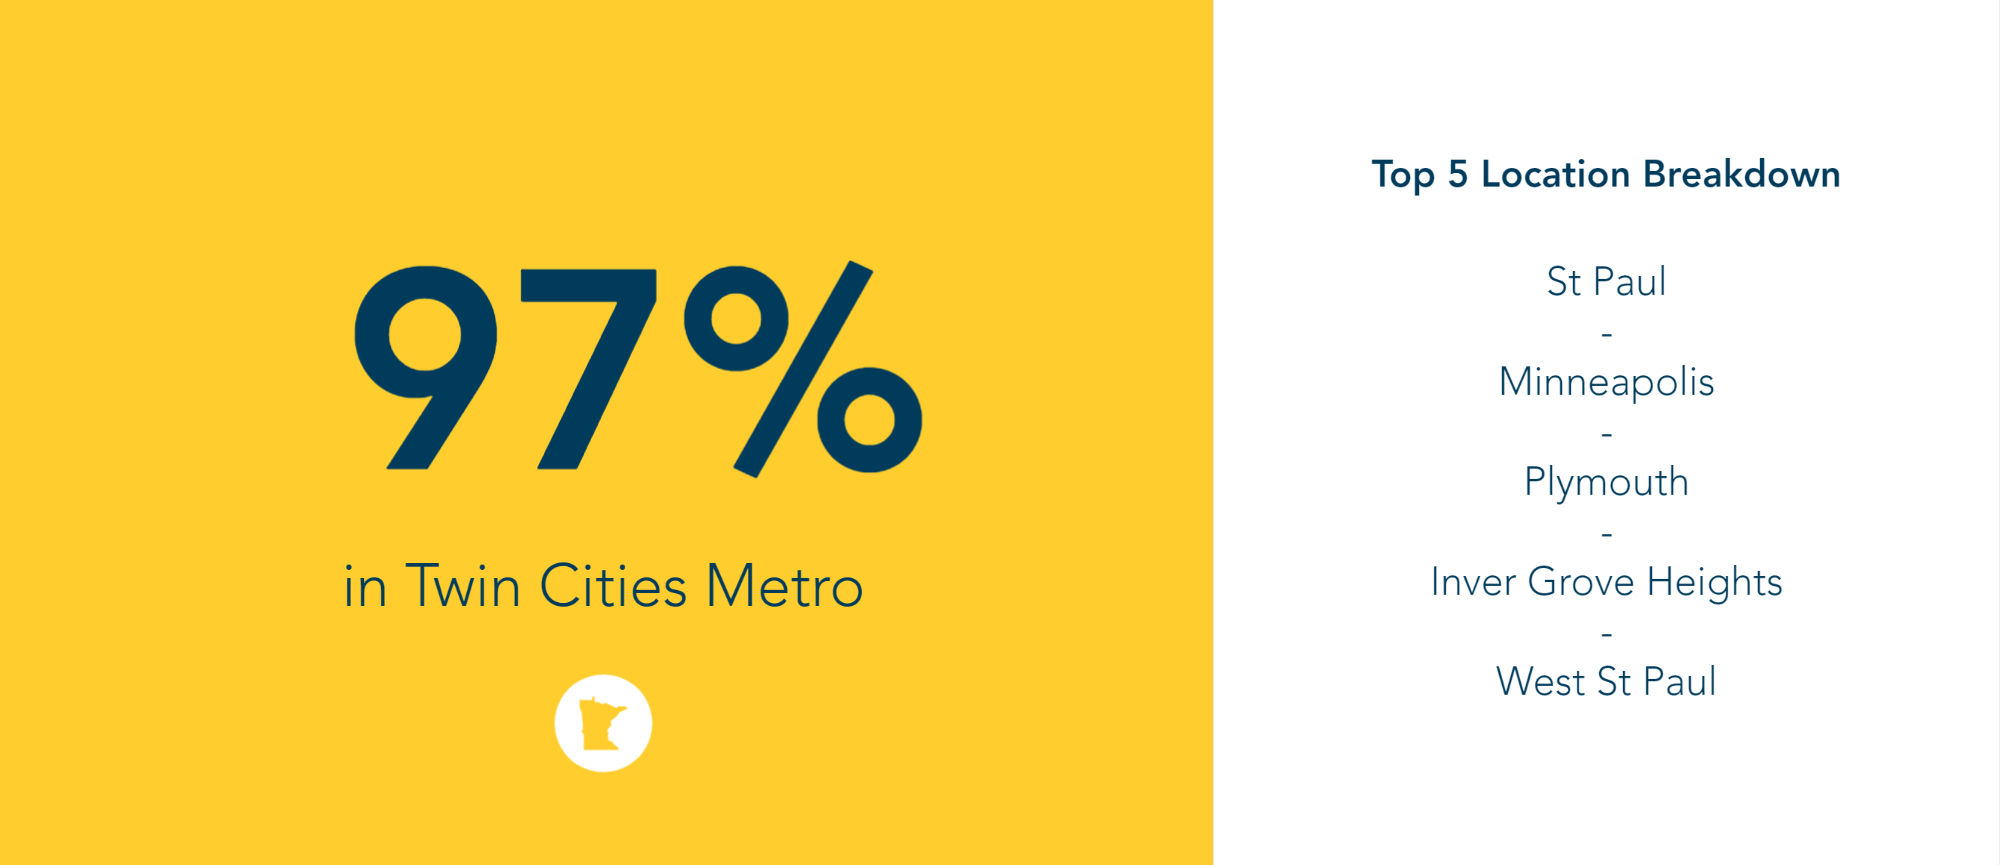 97% of loans made in the Twin Cities Metro. Top 5 Location Breakdown (ranked) St. Paul, Minneapolis, Plymouth, Inver Grove Heights, West St. Paul.